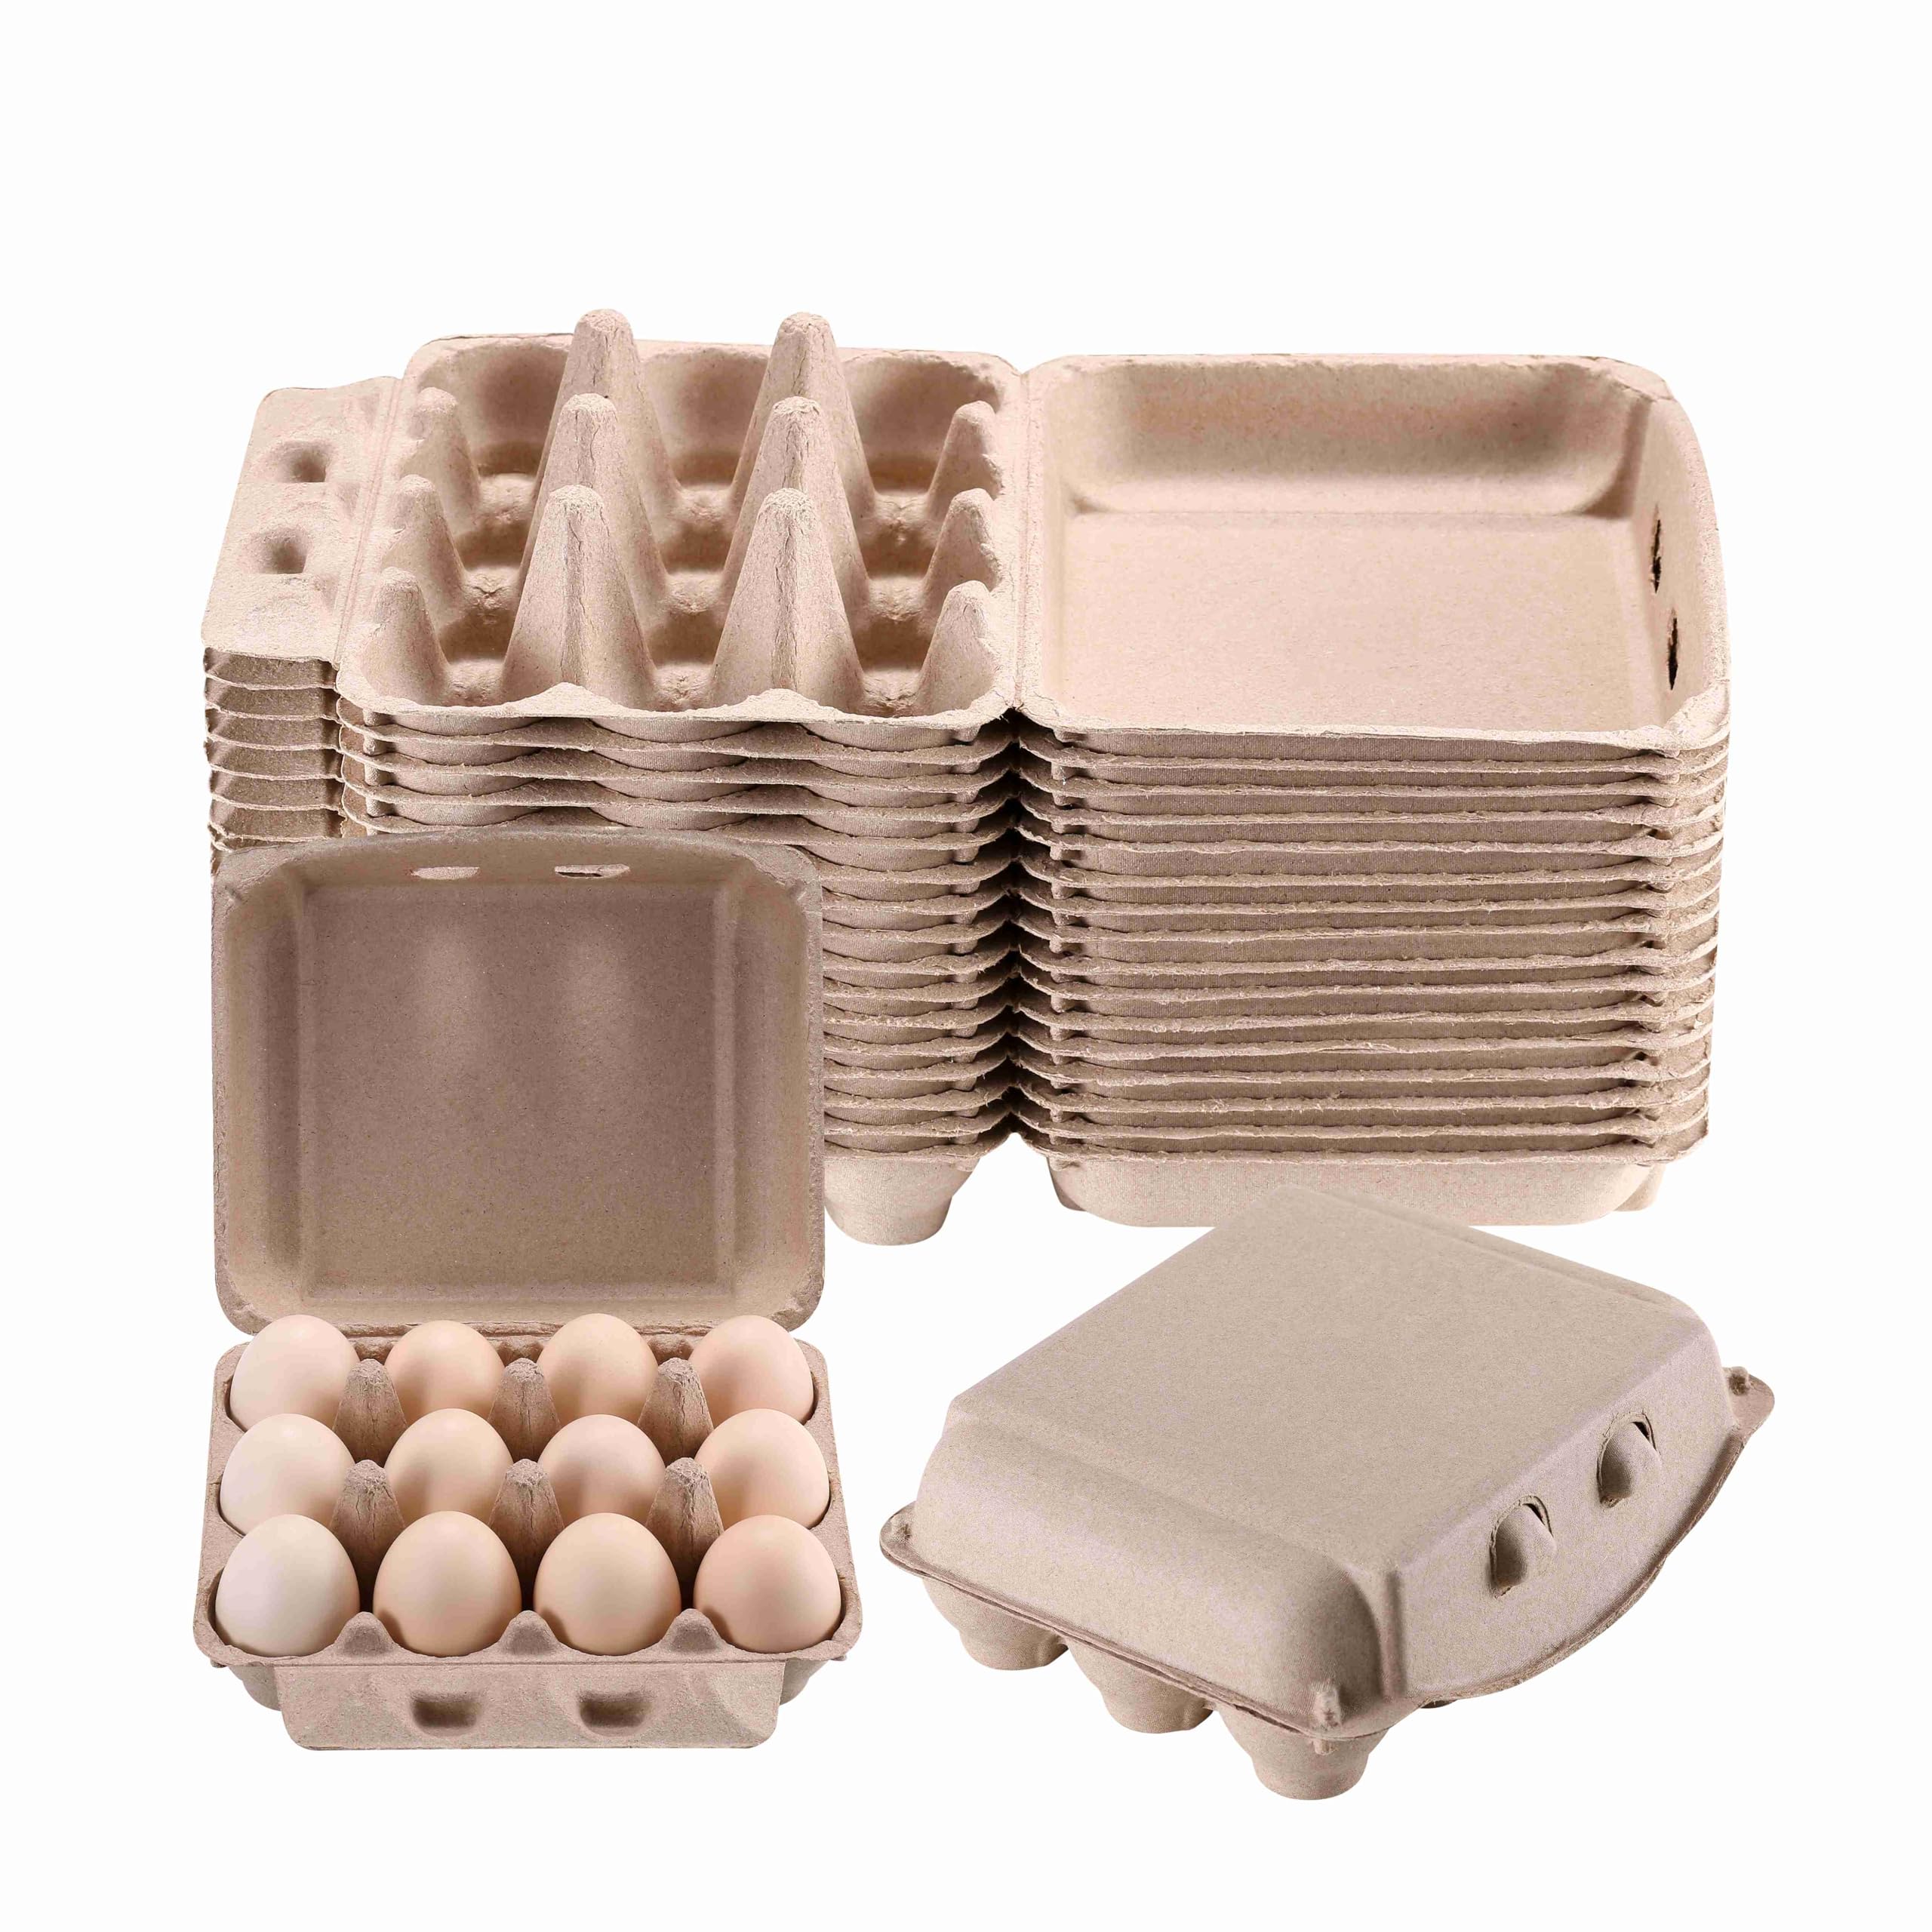 Vintage Egg Cartons 30 Pack, Blank Natural Paper Pulp Square Dozen Egg Cartons Eggs, Classical 3x4 Style Holds Up to One Twelve 12 Count Chicken Eggs, Sturdy Design Made from Recycled Cardboard